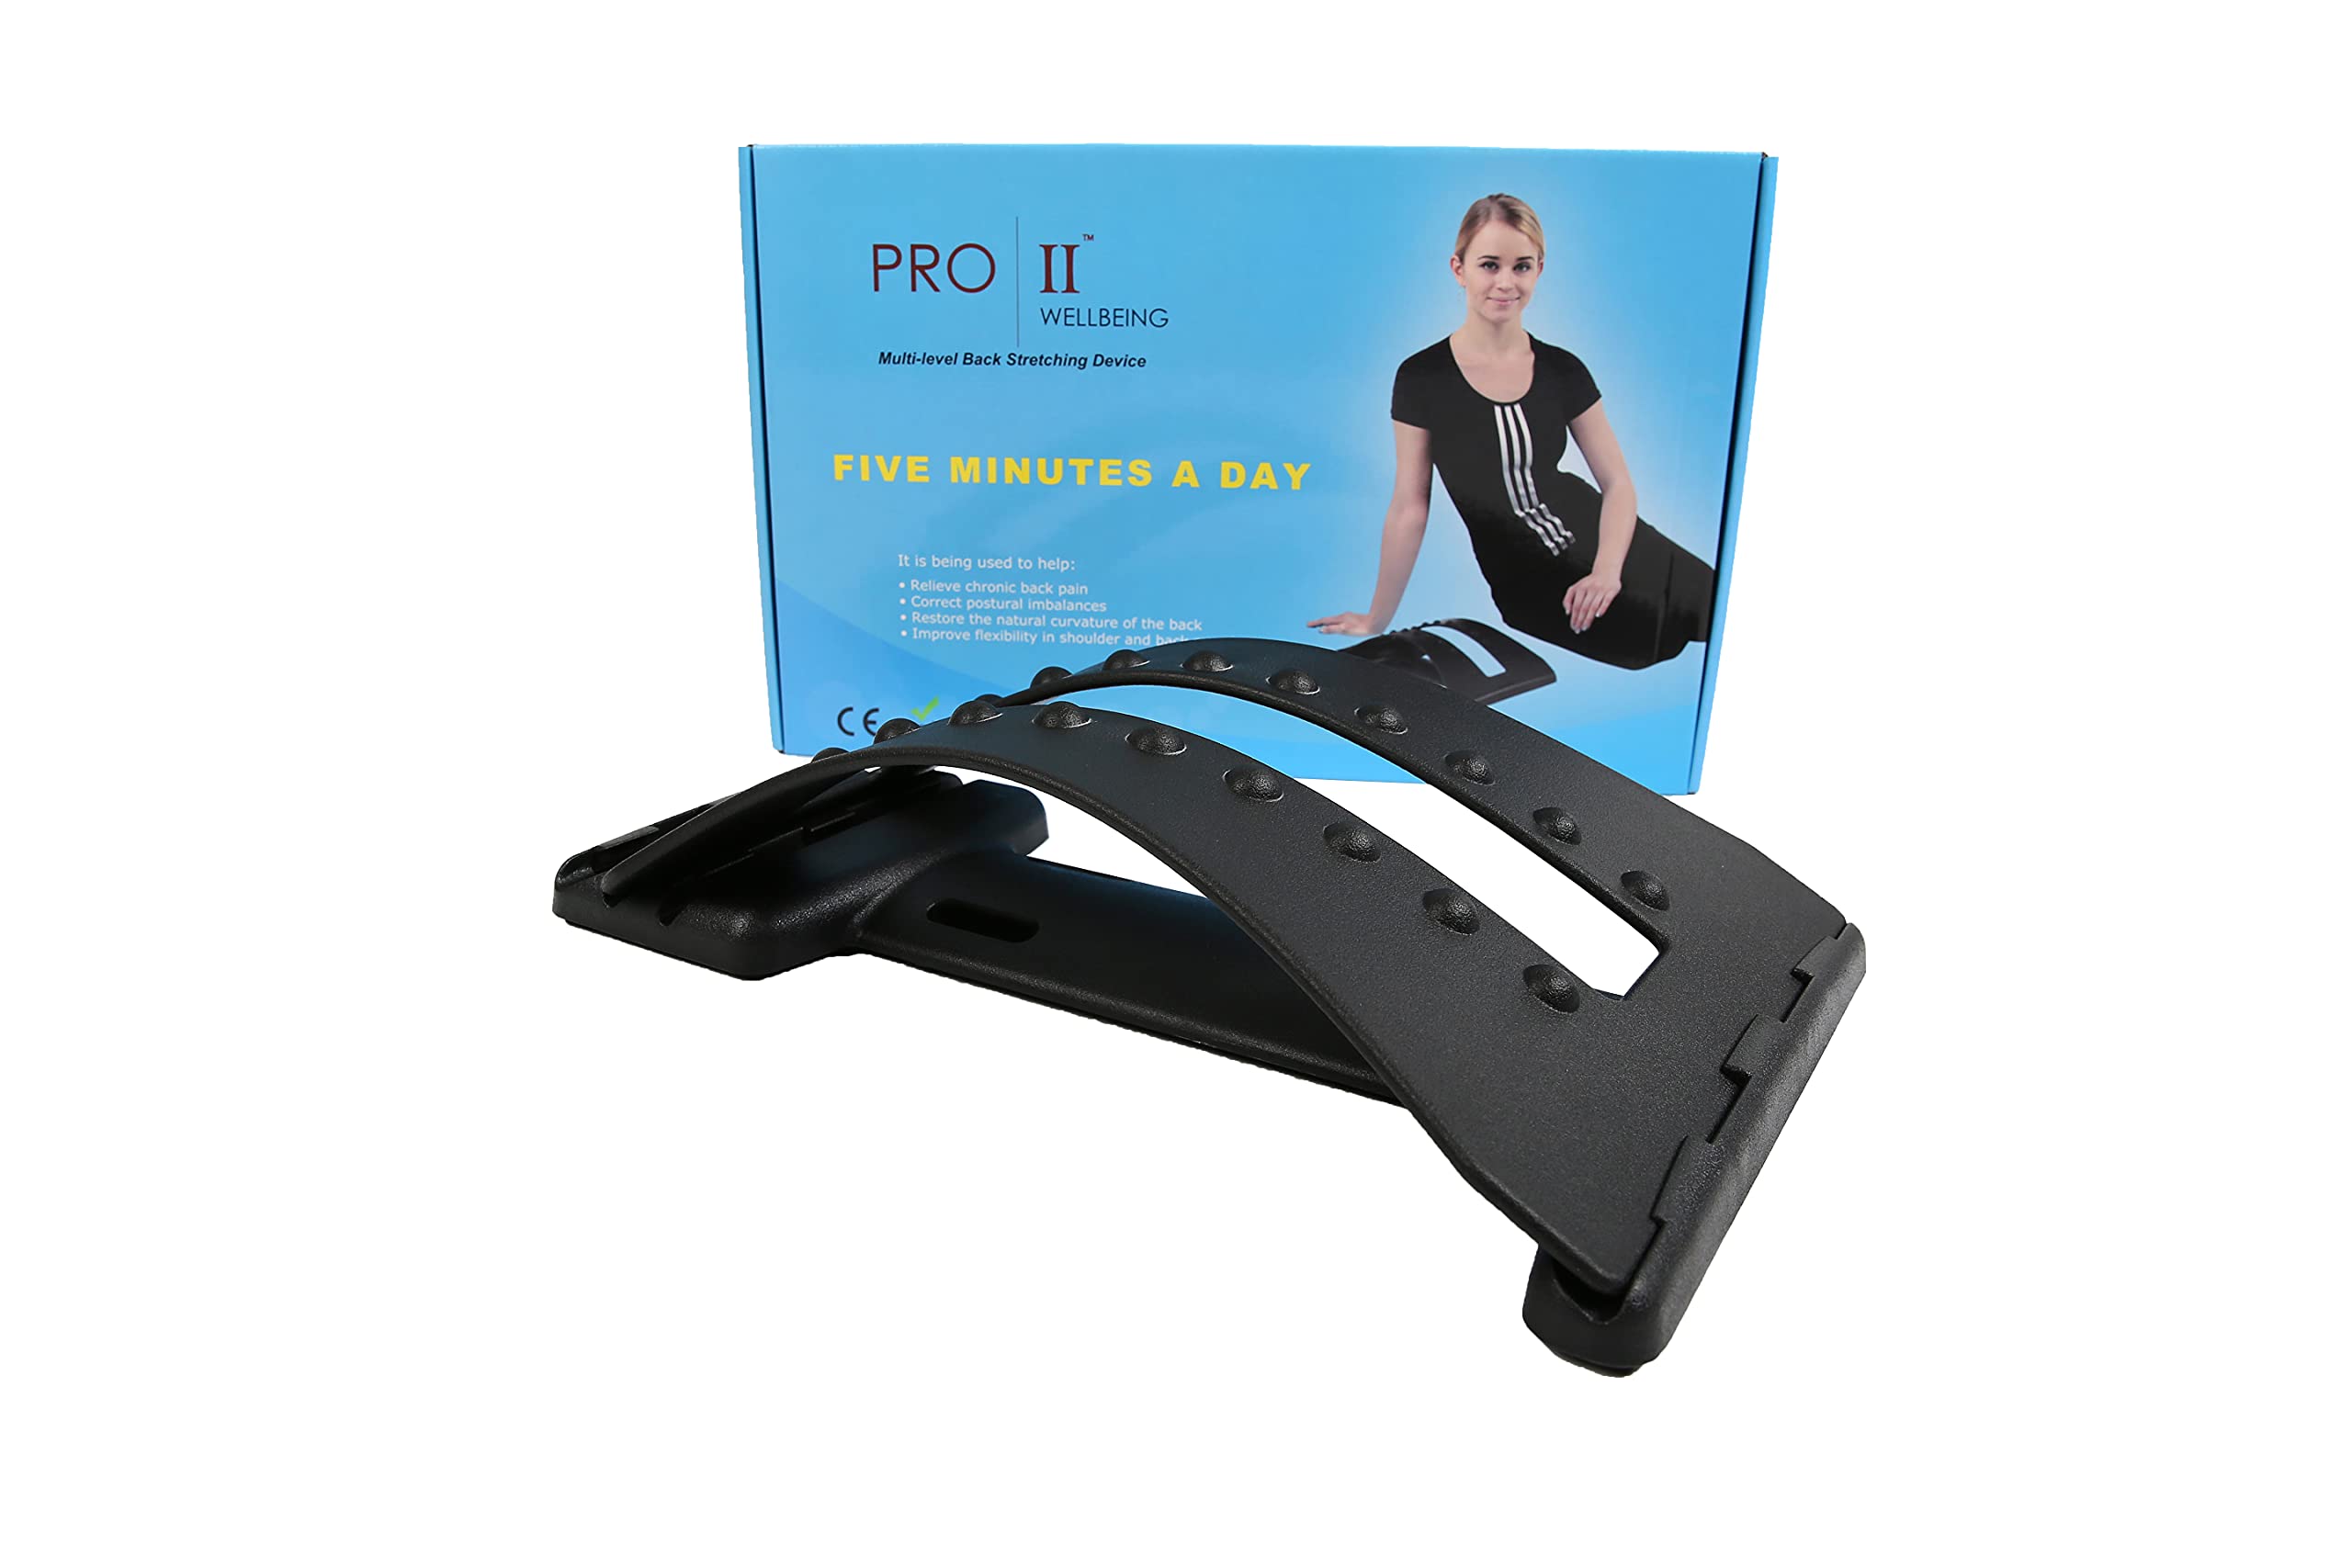 Pro11 Wellbeing 3rd Generation Design Posture Plus Corrector and Back Pain Relief Stretcher with Scannable QR Code Instructions